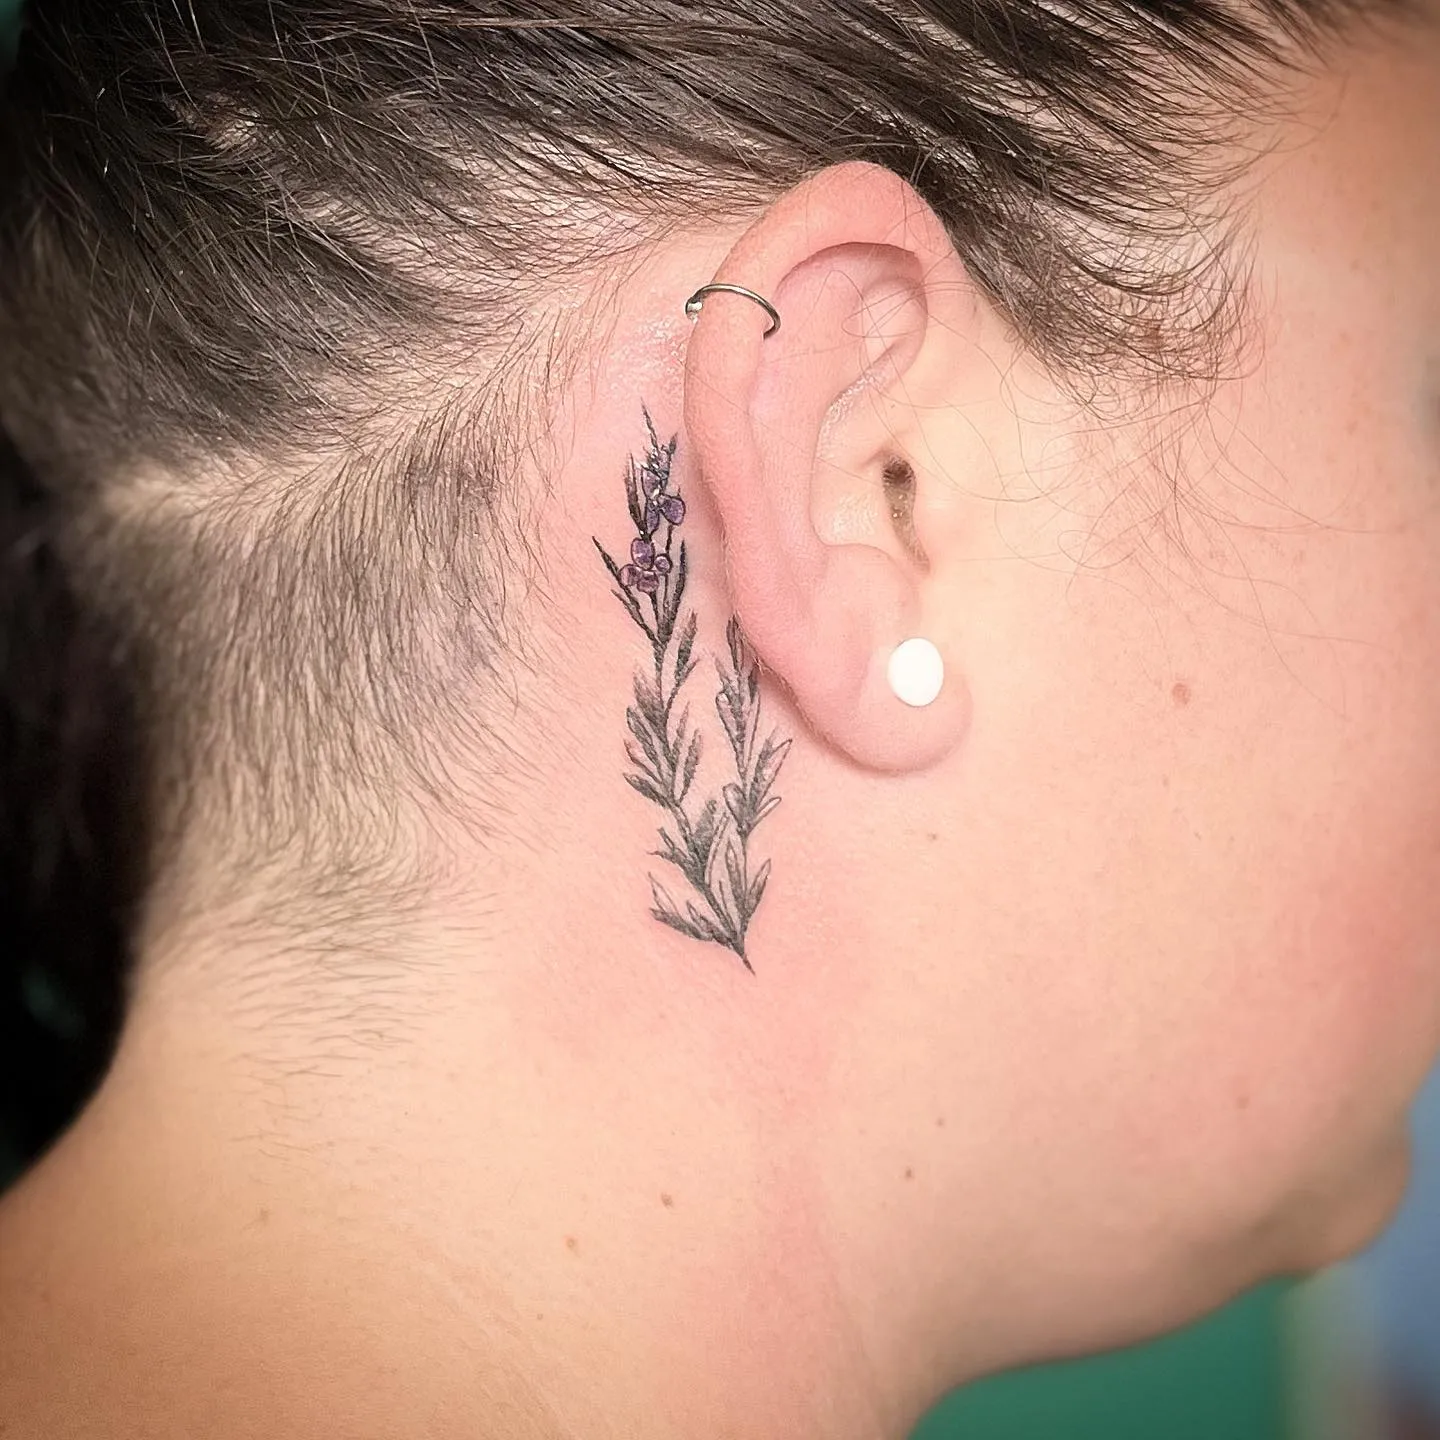 Intricate Rosemary Sprig Tattoo Behind the Ear